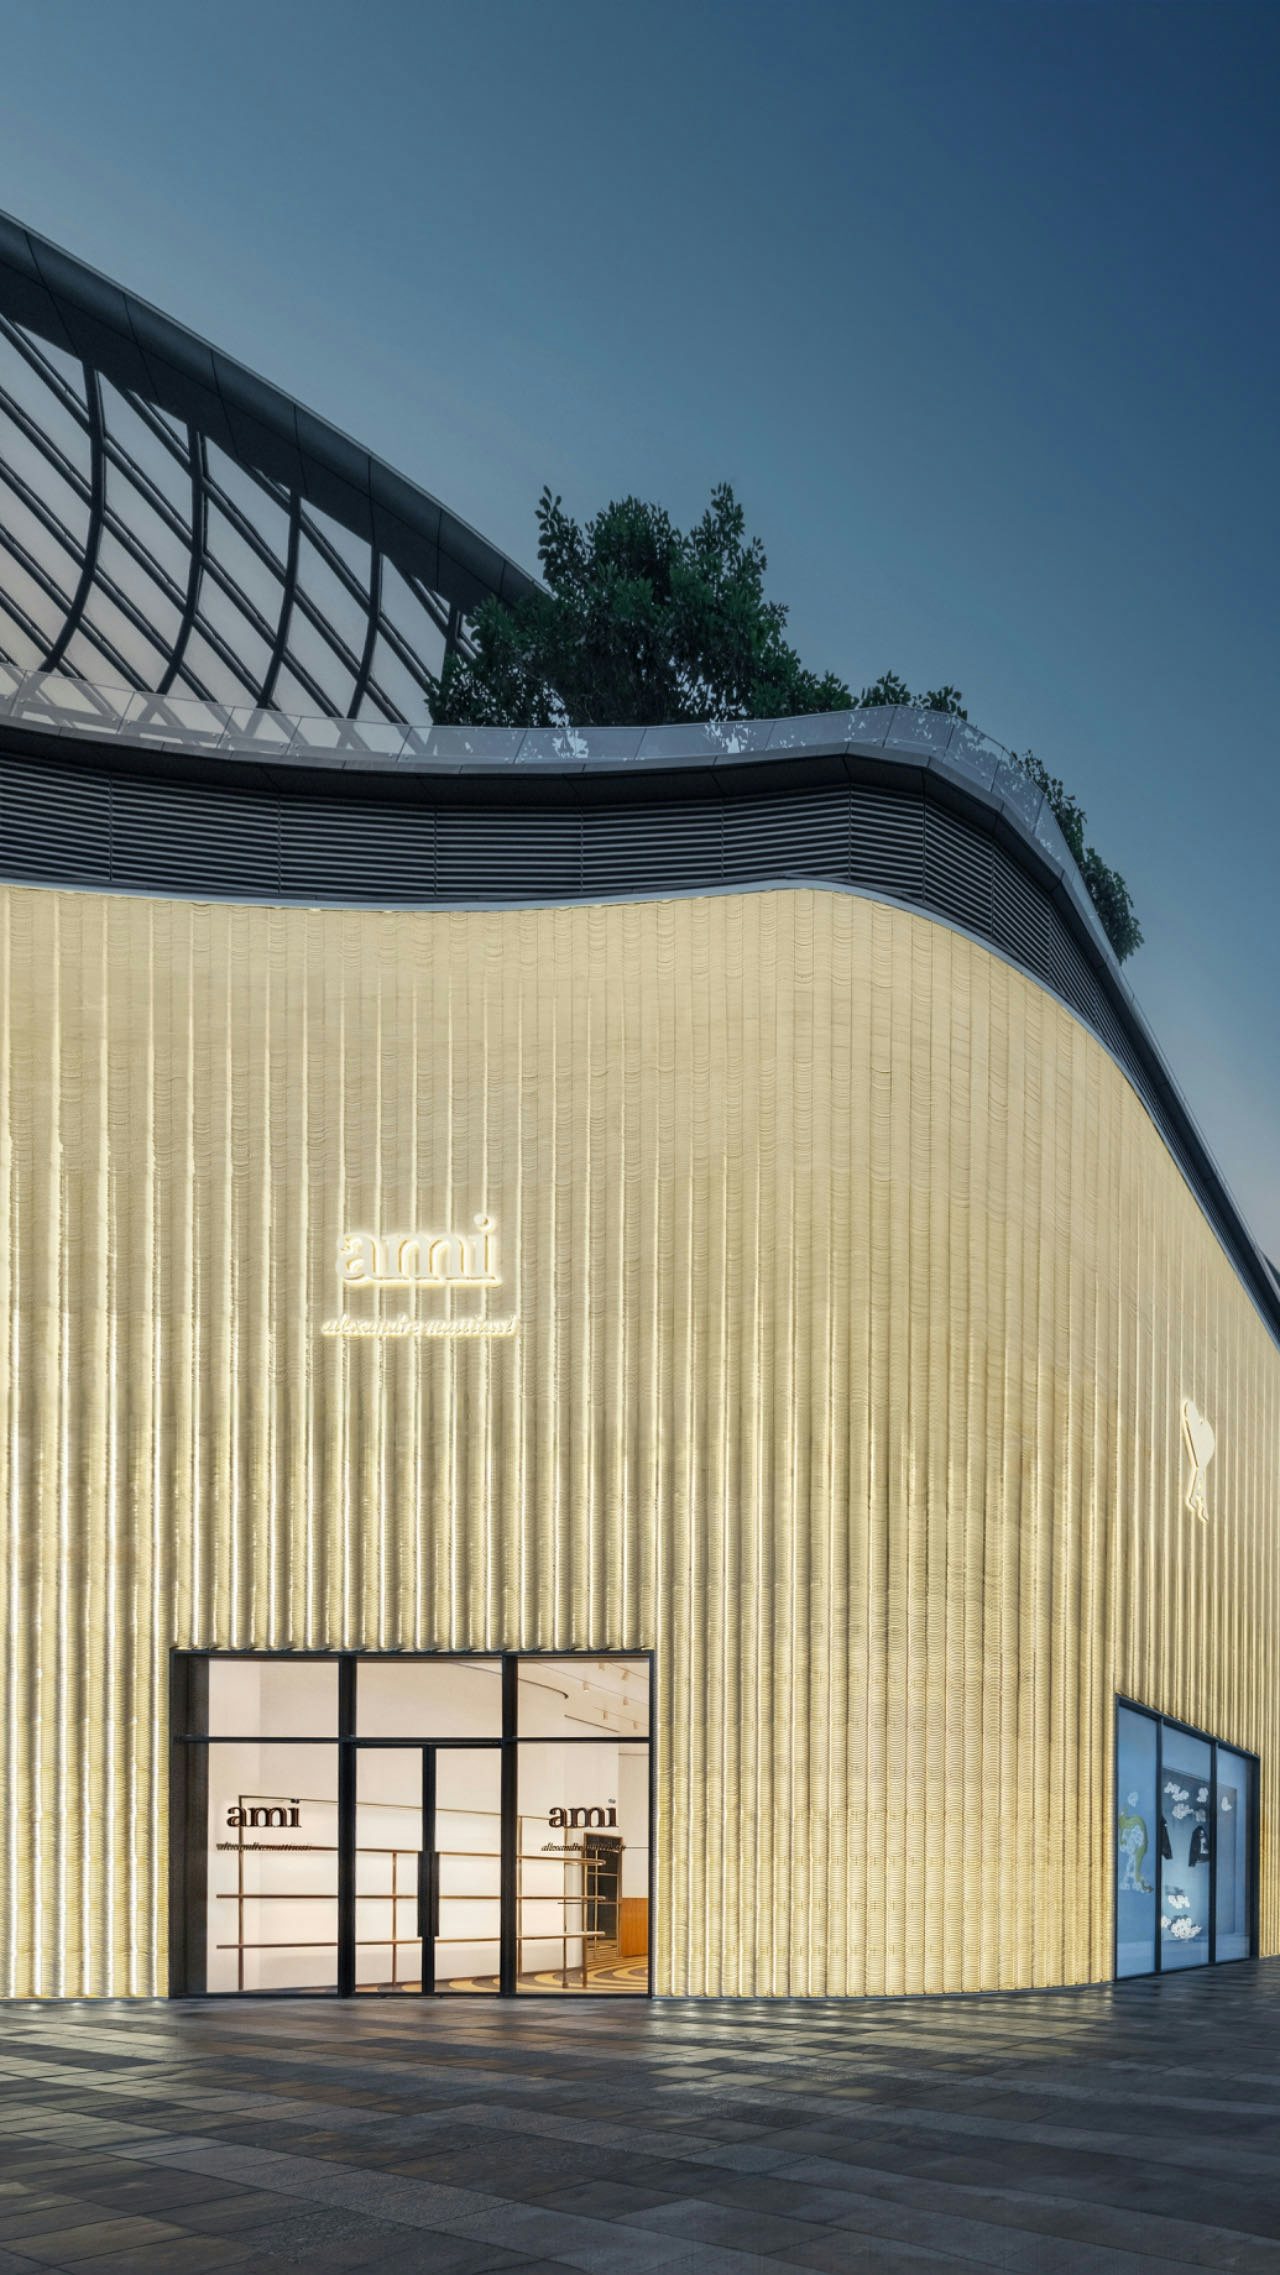 The Ami Paris store in Guangzhou features a facade of 450sqm made from 140,000 enameled tiles produced in the traditional Cantonese architectural style. Image: Ami